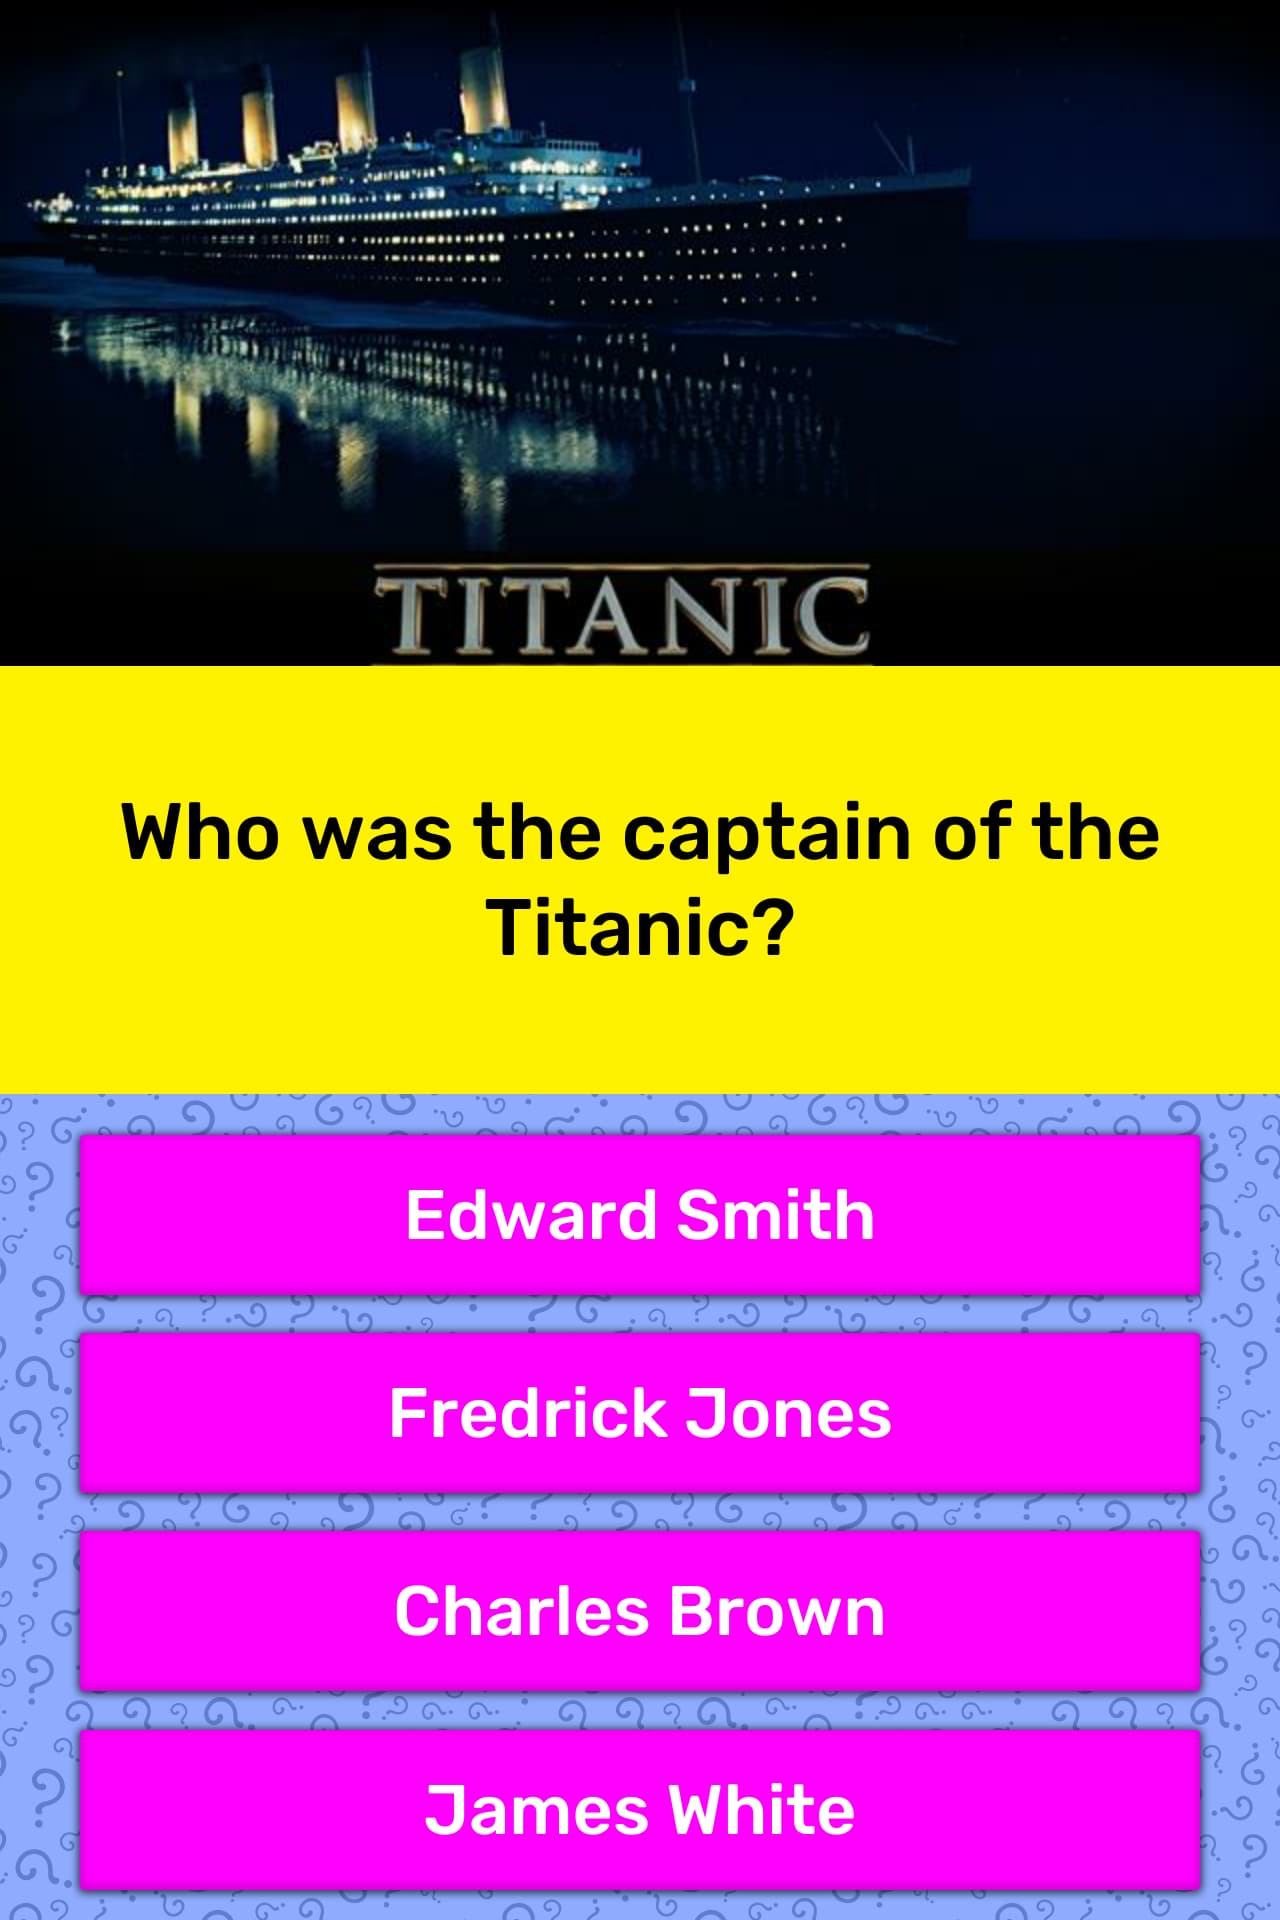 where was the captain of the titanic last seen